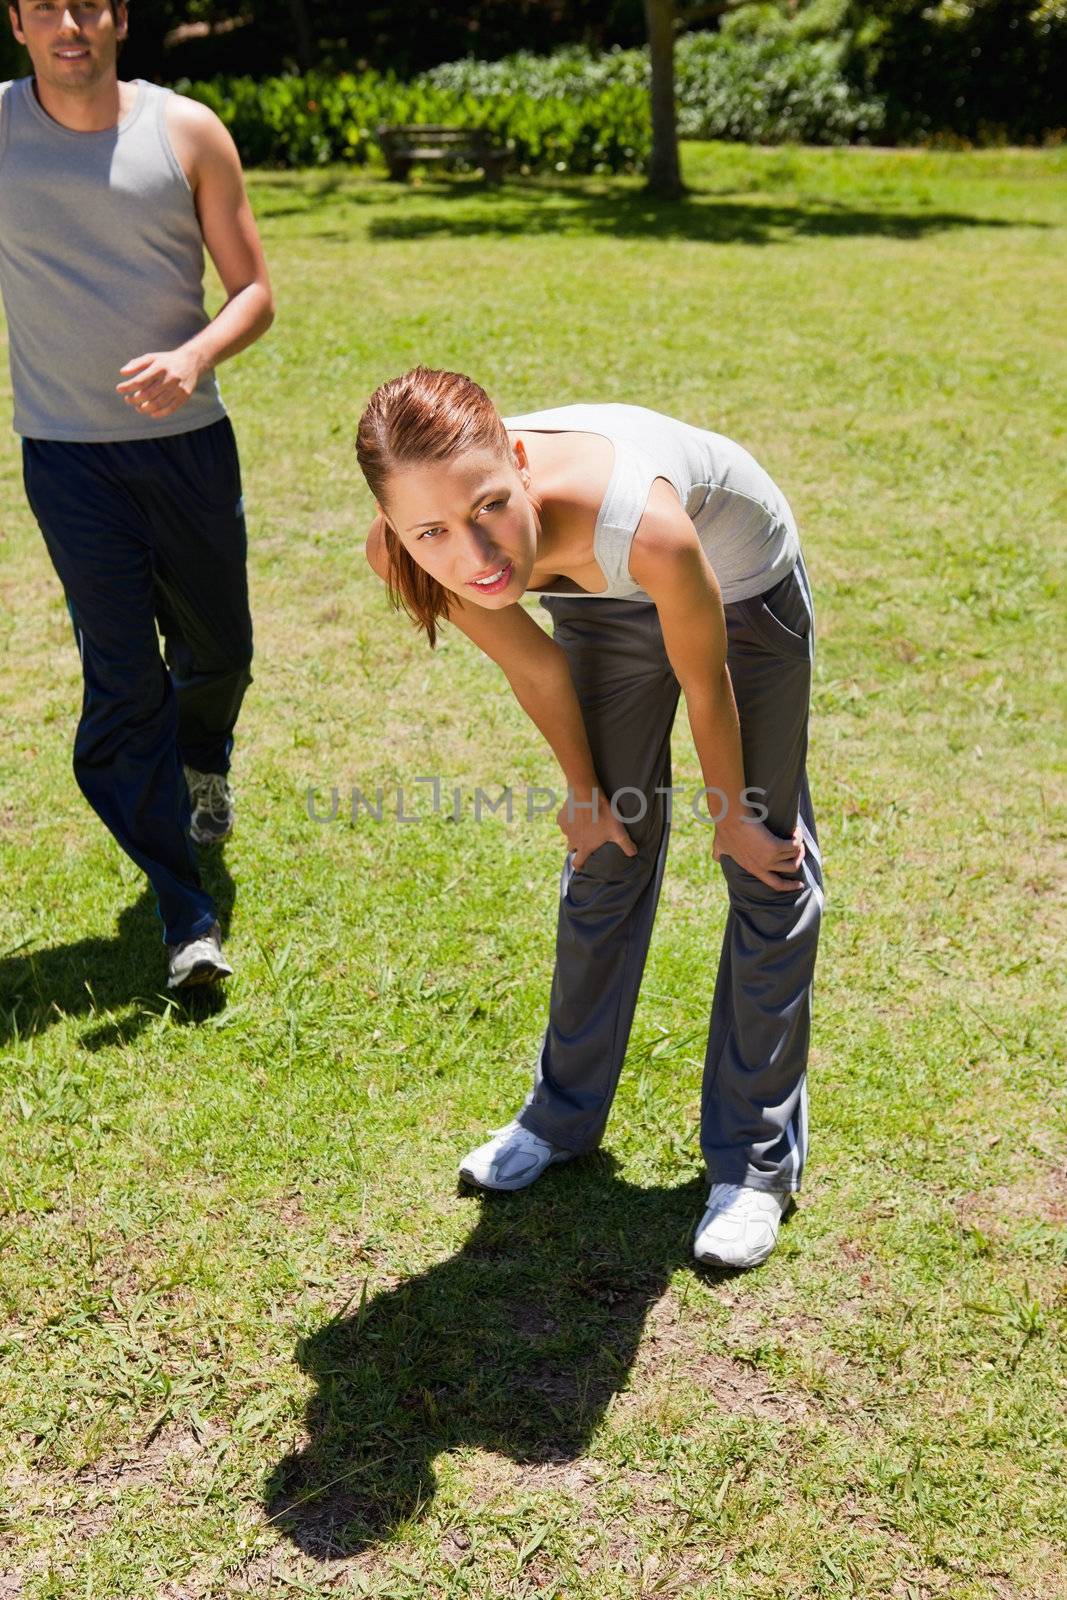 Woman bending over to recover while a man is jogging behind her on the grass